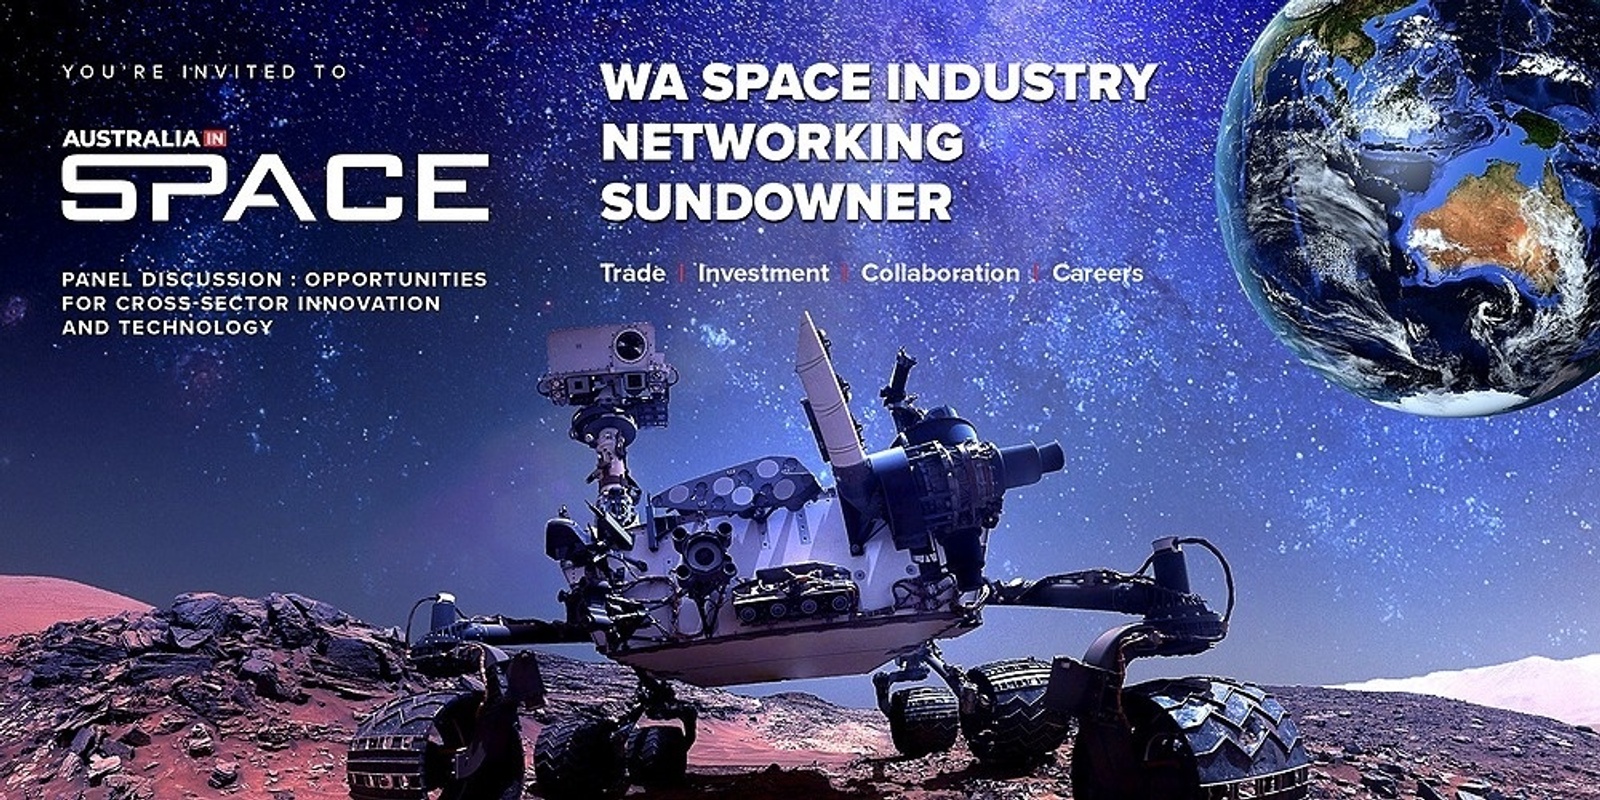 Banner image for Australia in Space  - WA Space Industry Networking Sundowner